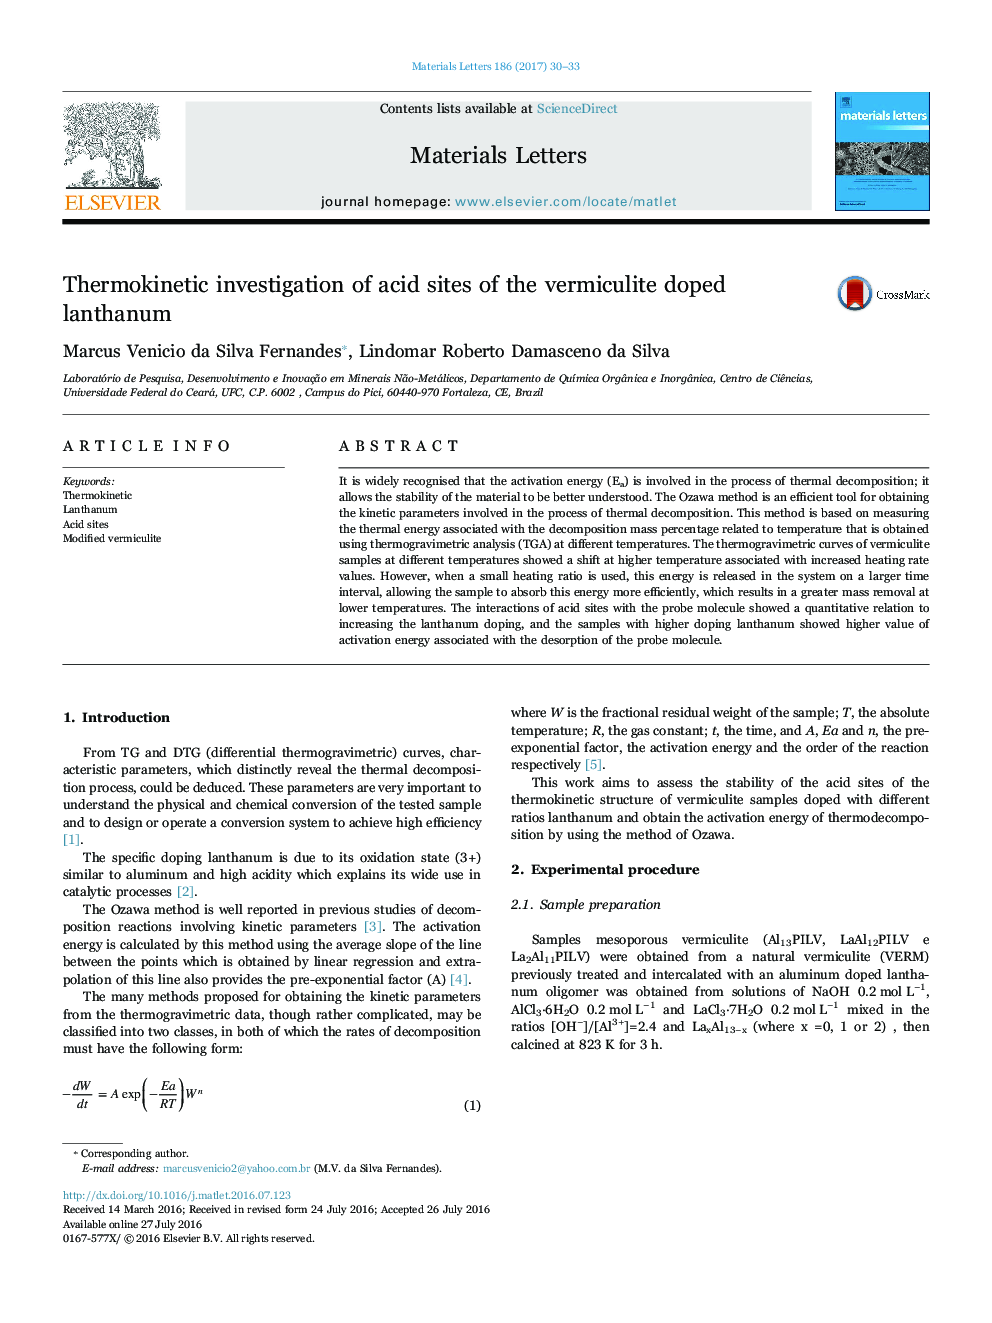 Thermokinetic investigation of acid sites of the vermiculite doped lanthanum